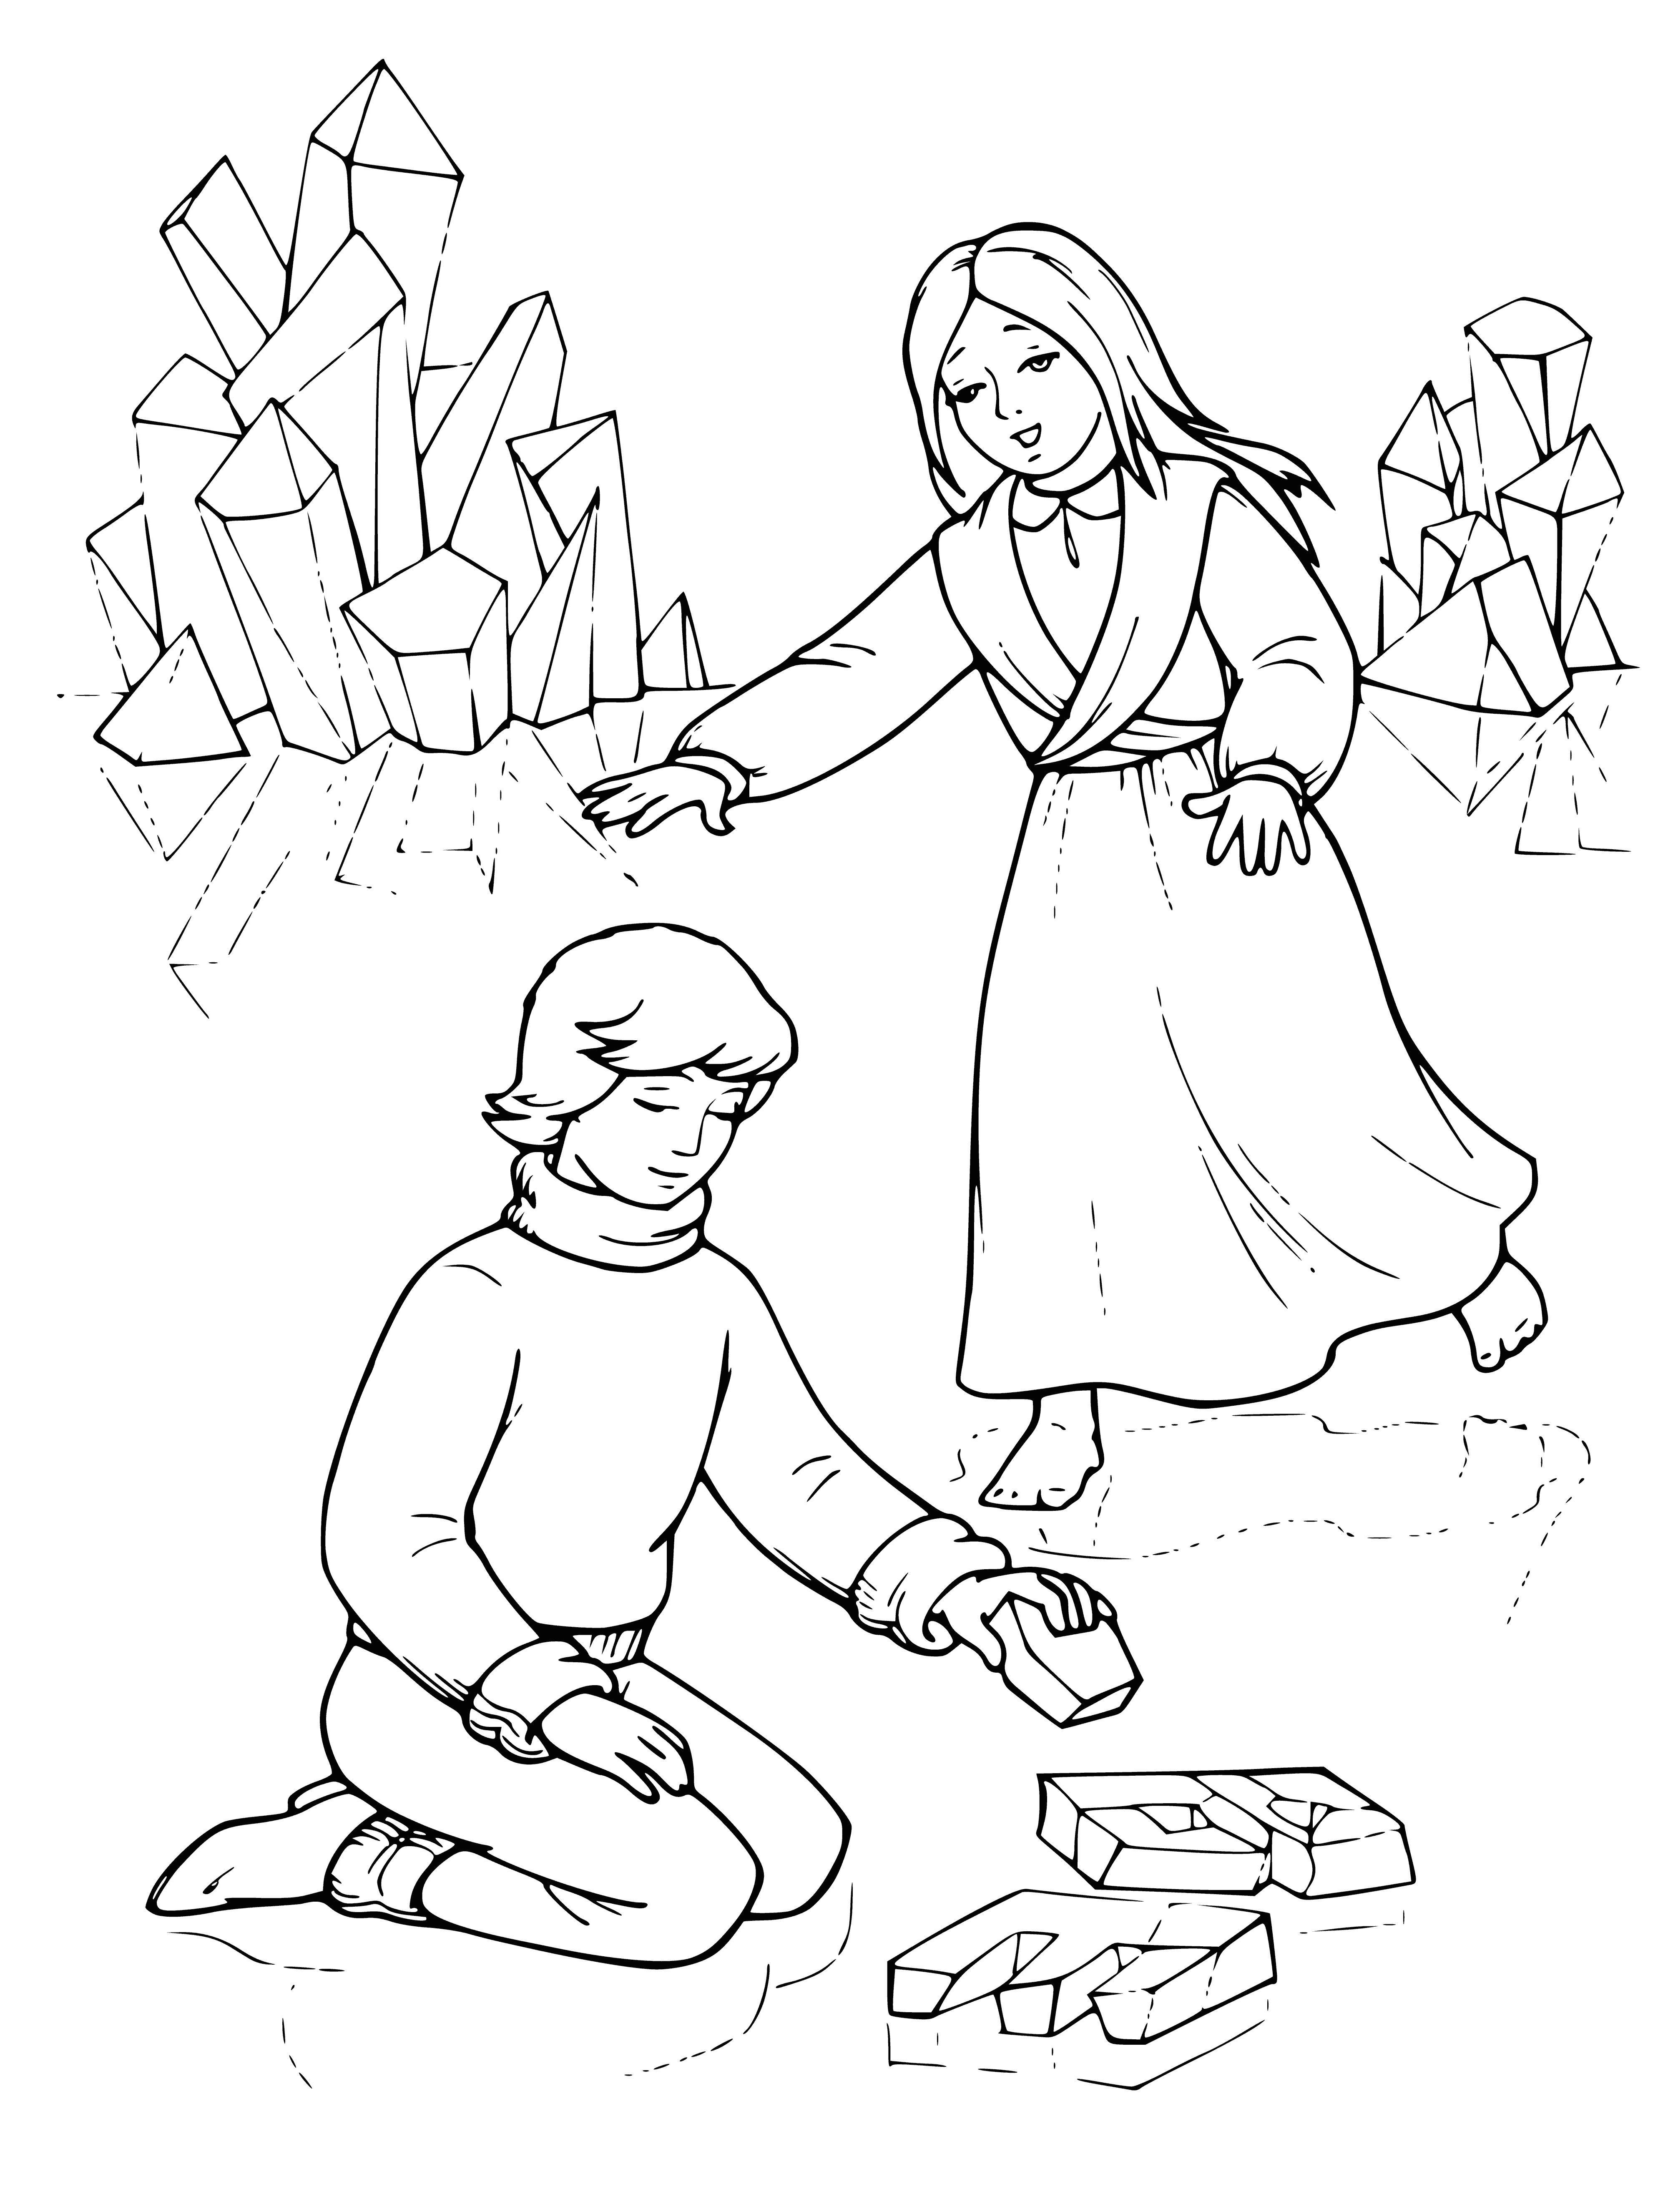 Gerda finds Kai coloring page